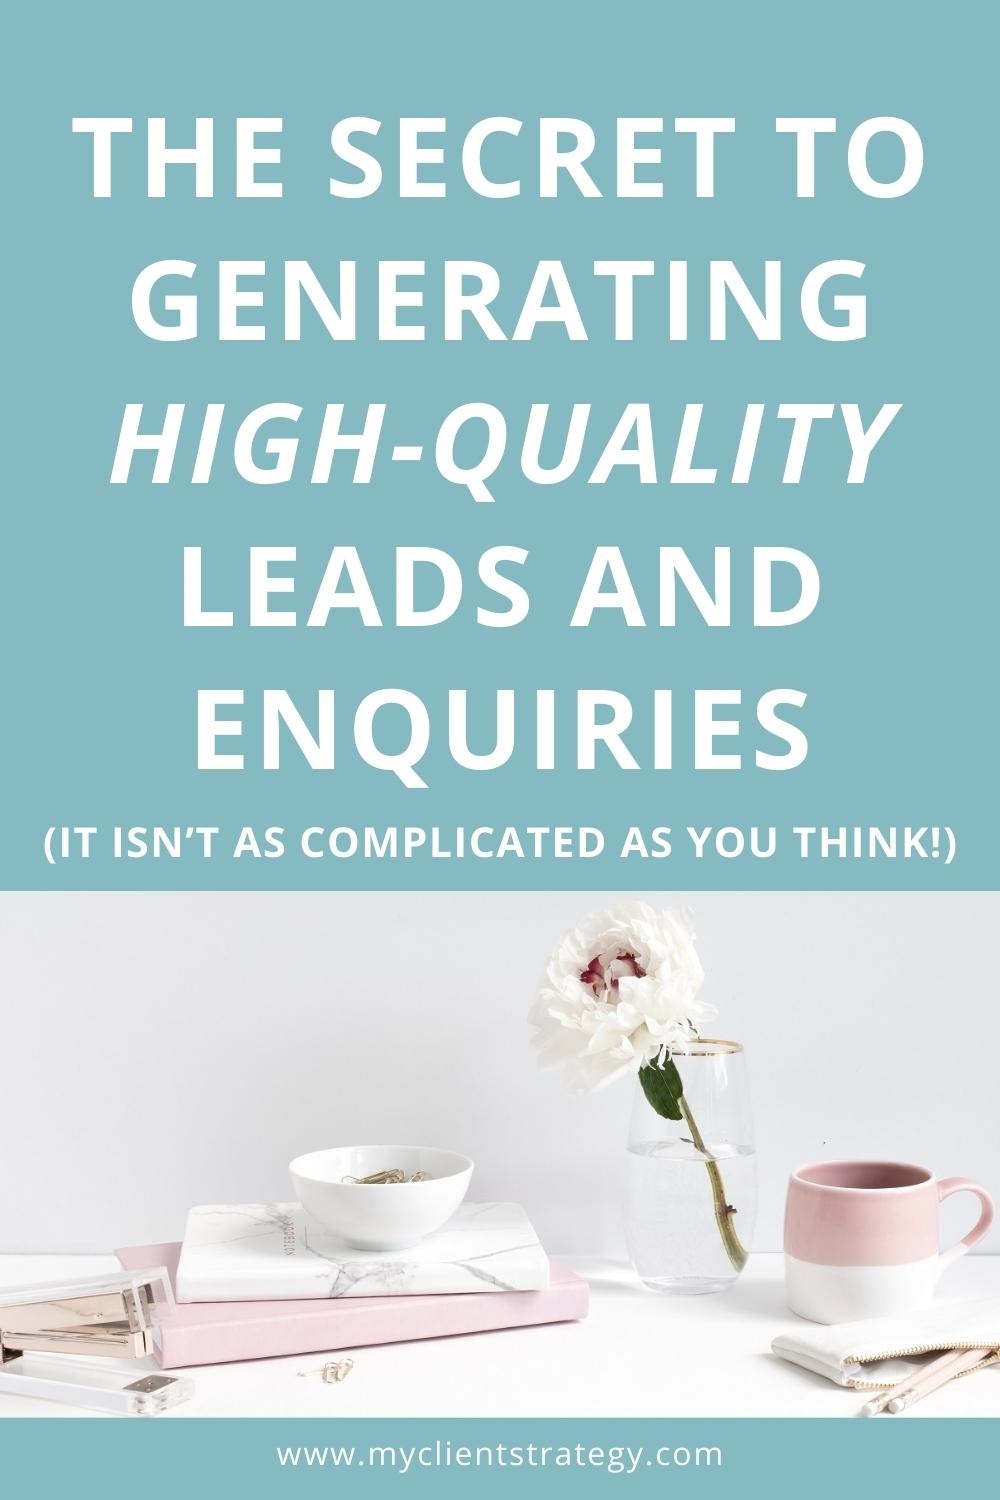 The secret to generating high quality leads and enquiries